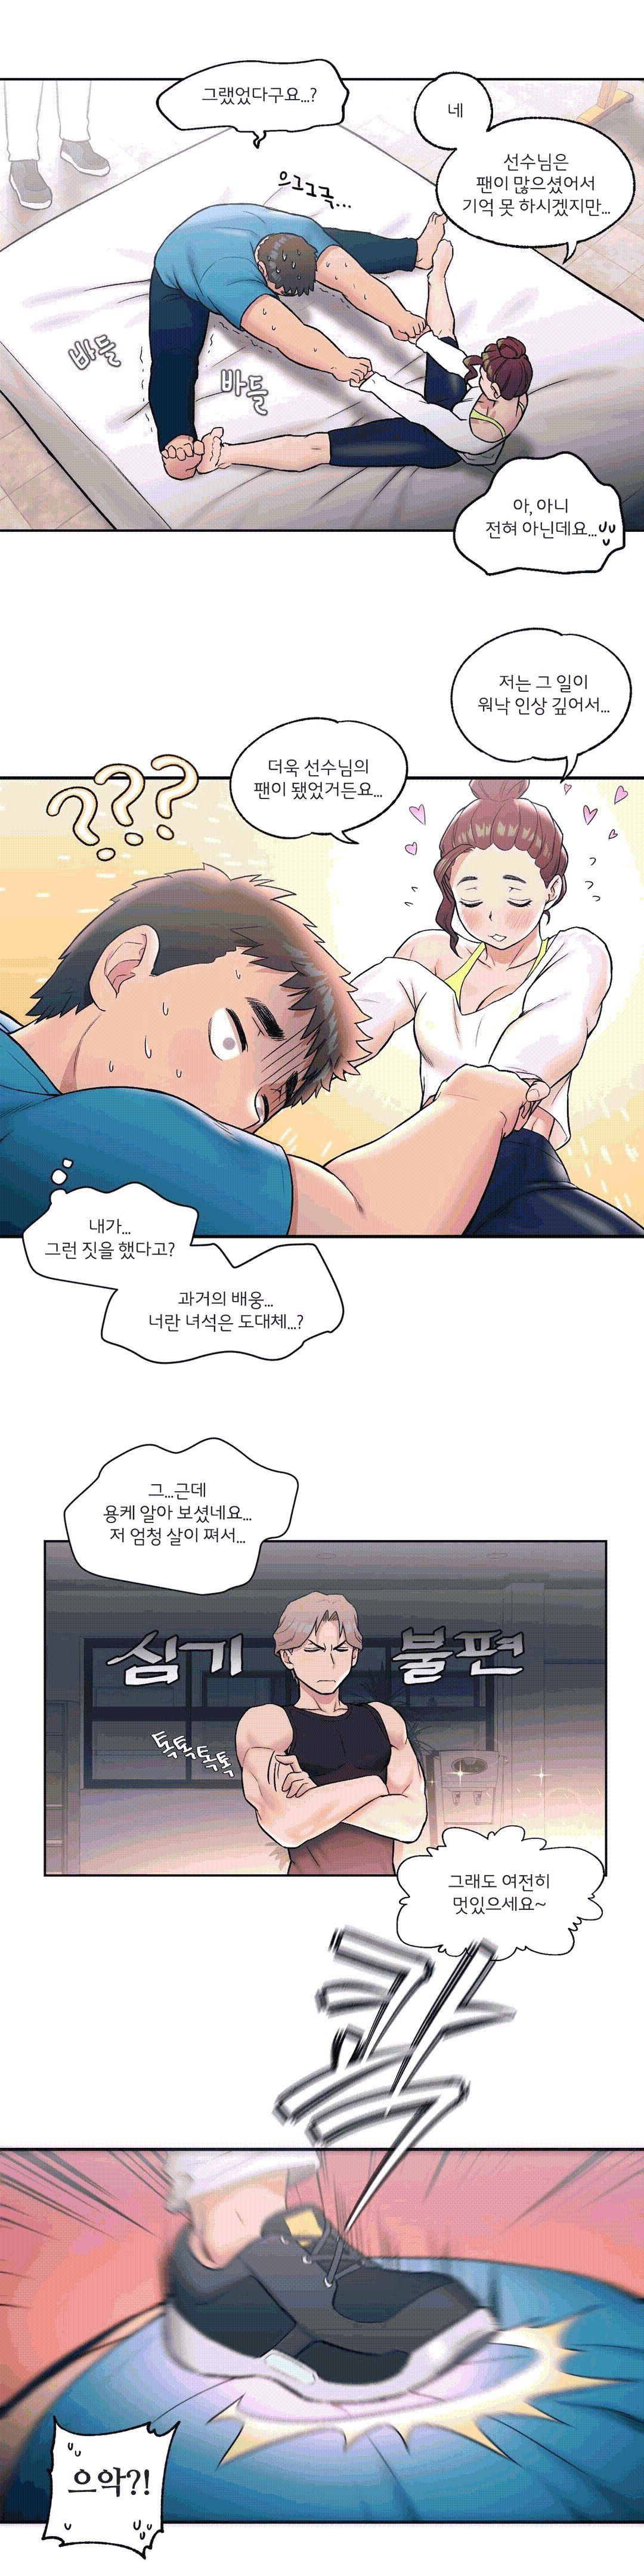 Sexercise Raw - Chapter 20 Page 6